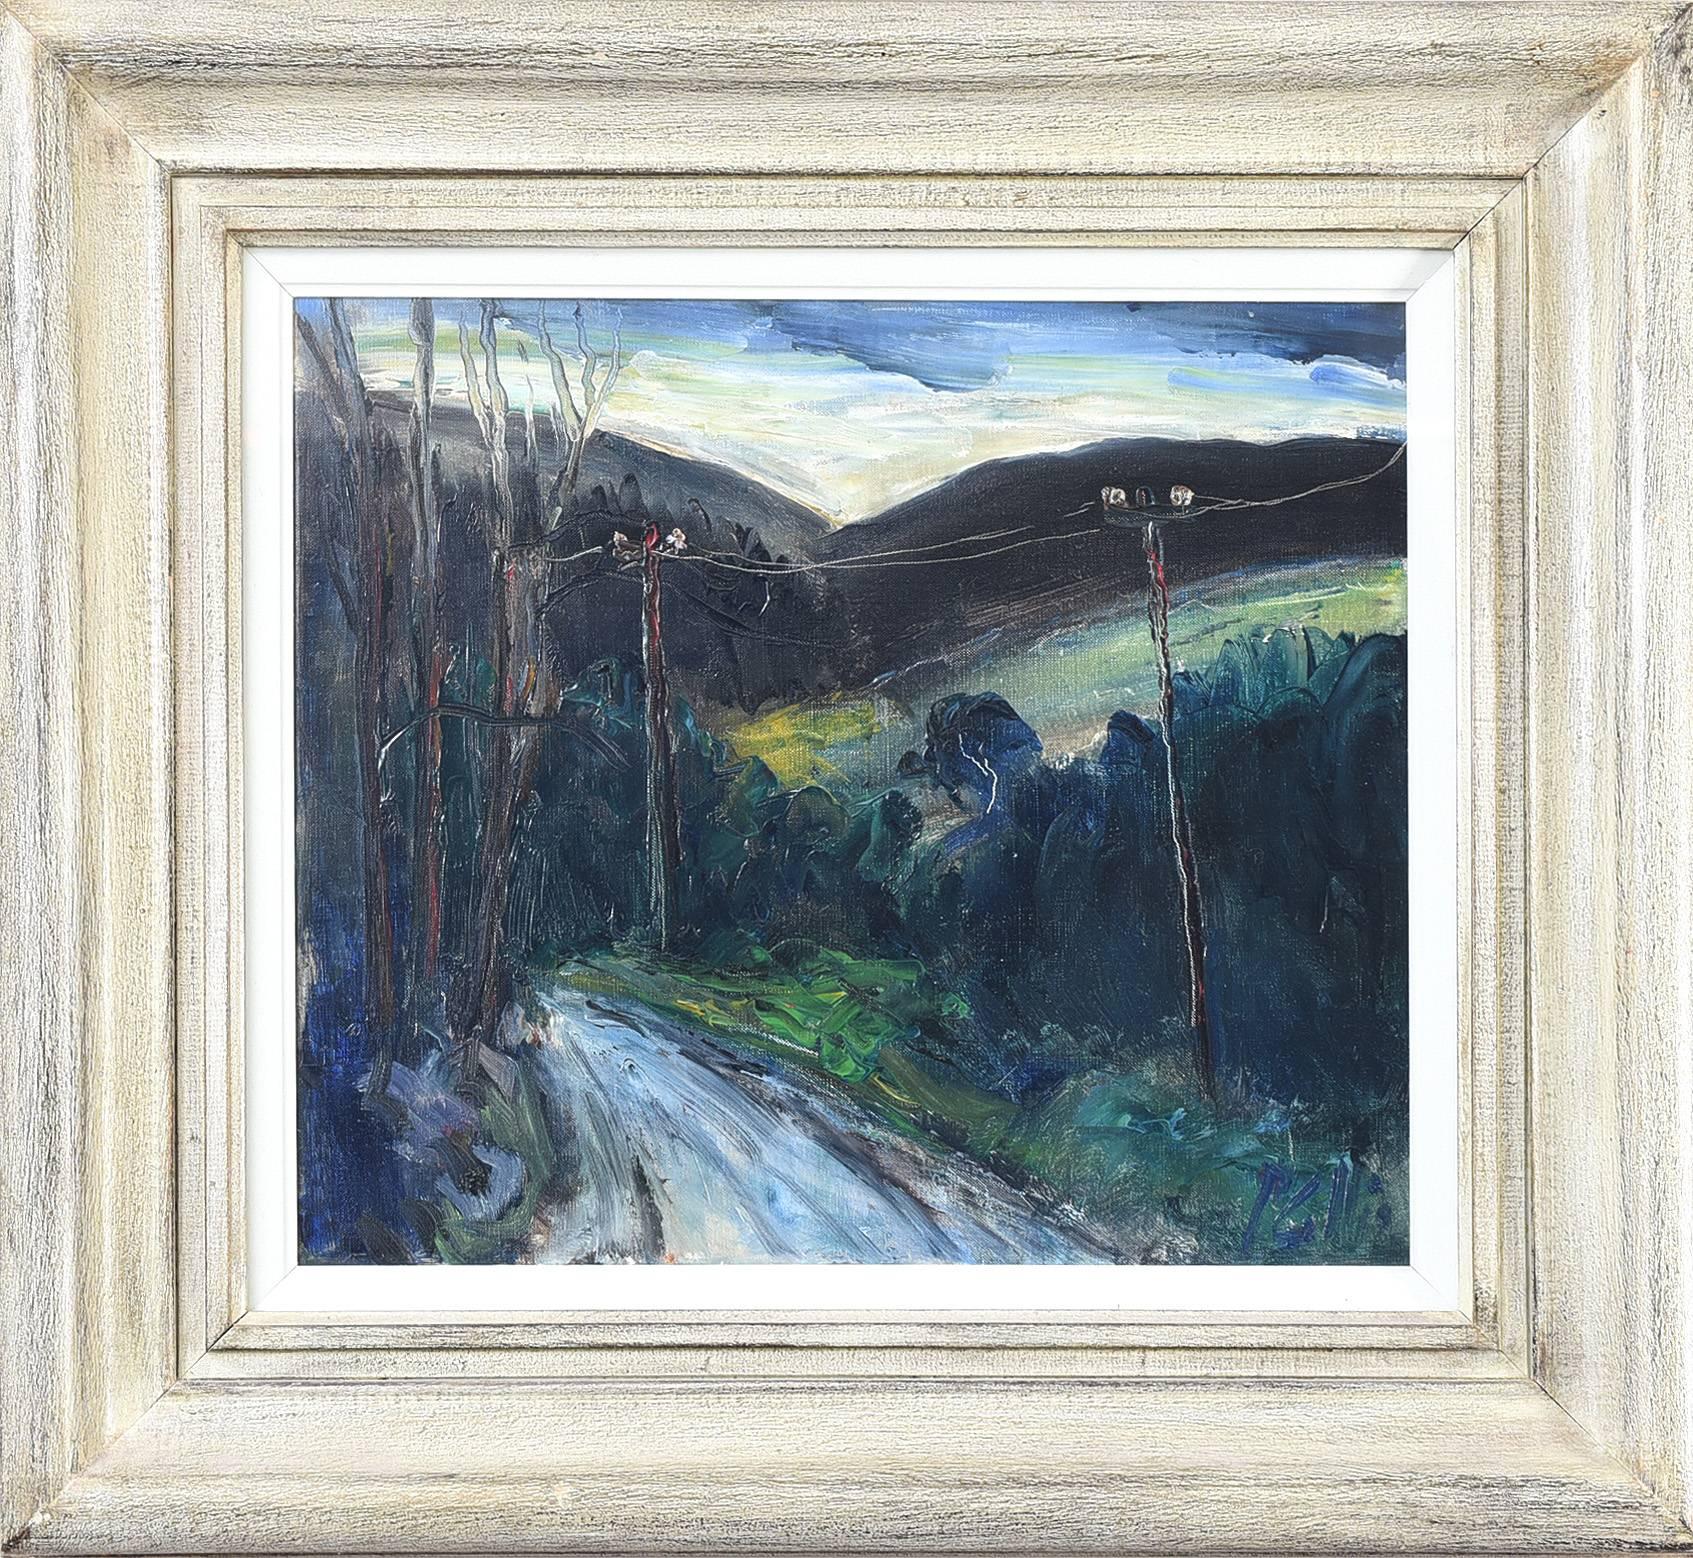 Oil on canvas
Signed
Framed
Measure: 13.5 x 15.5 inches (22 x 24 inches framed)

Peter Collis was born in 1929, London and was educated at Epsom College of Art, London, moving to Ireland in 1969. Desmond McAvock from The Irish Times in 1985